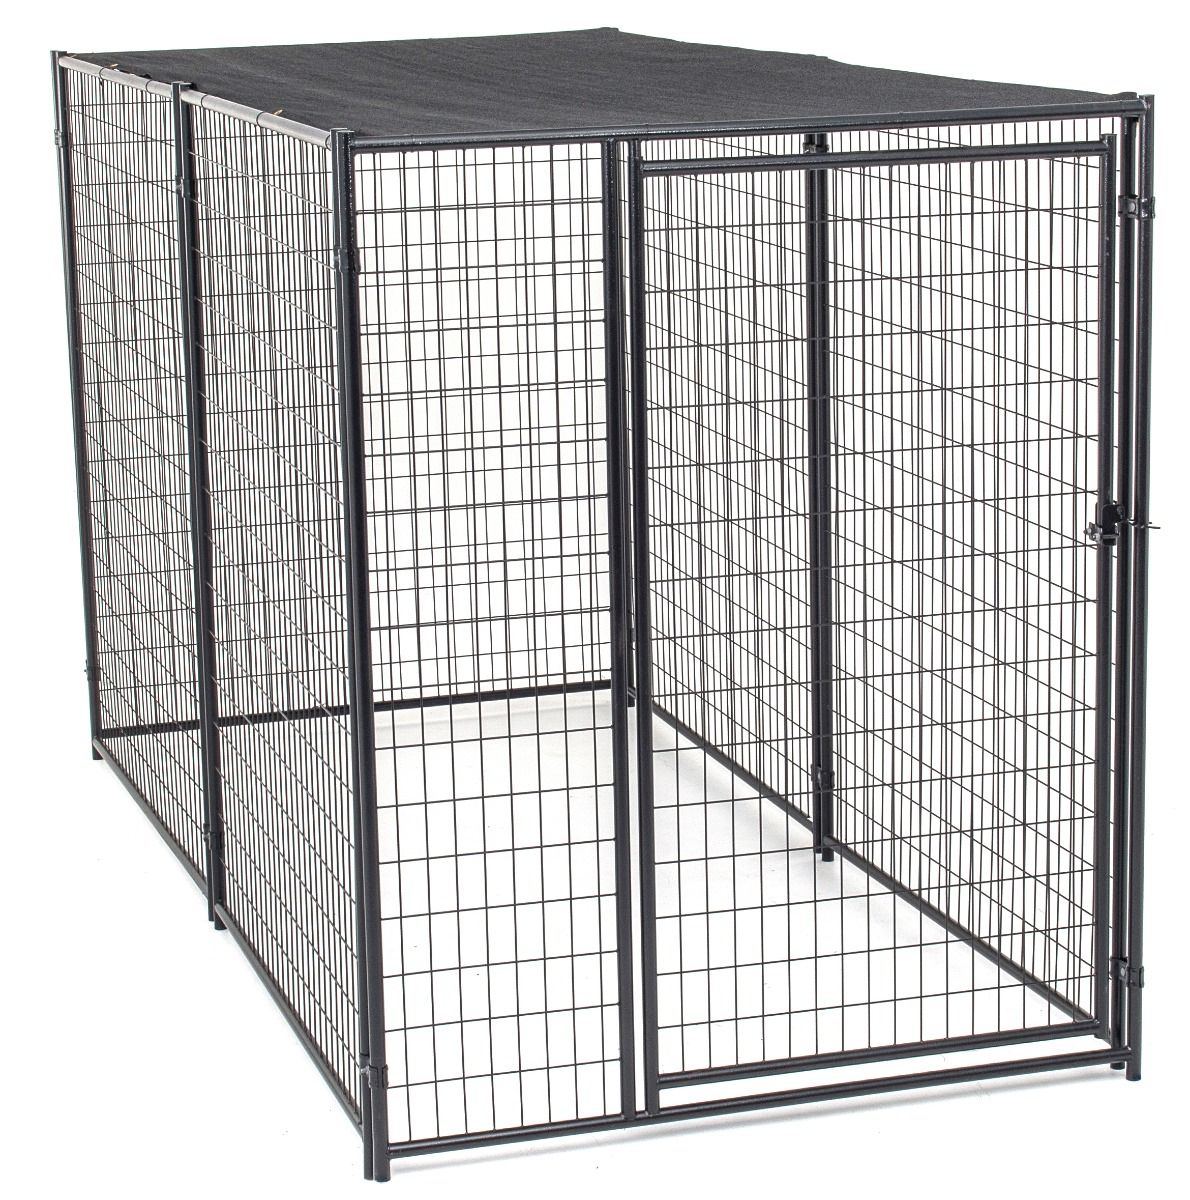 Lucky Dog Modular Kennel - Perfect for Medium to Large Dogs